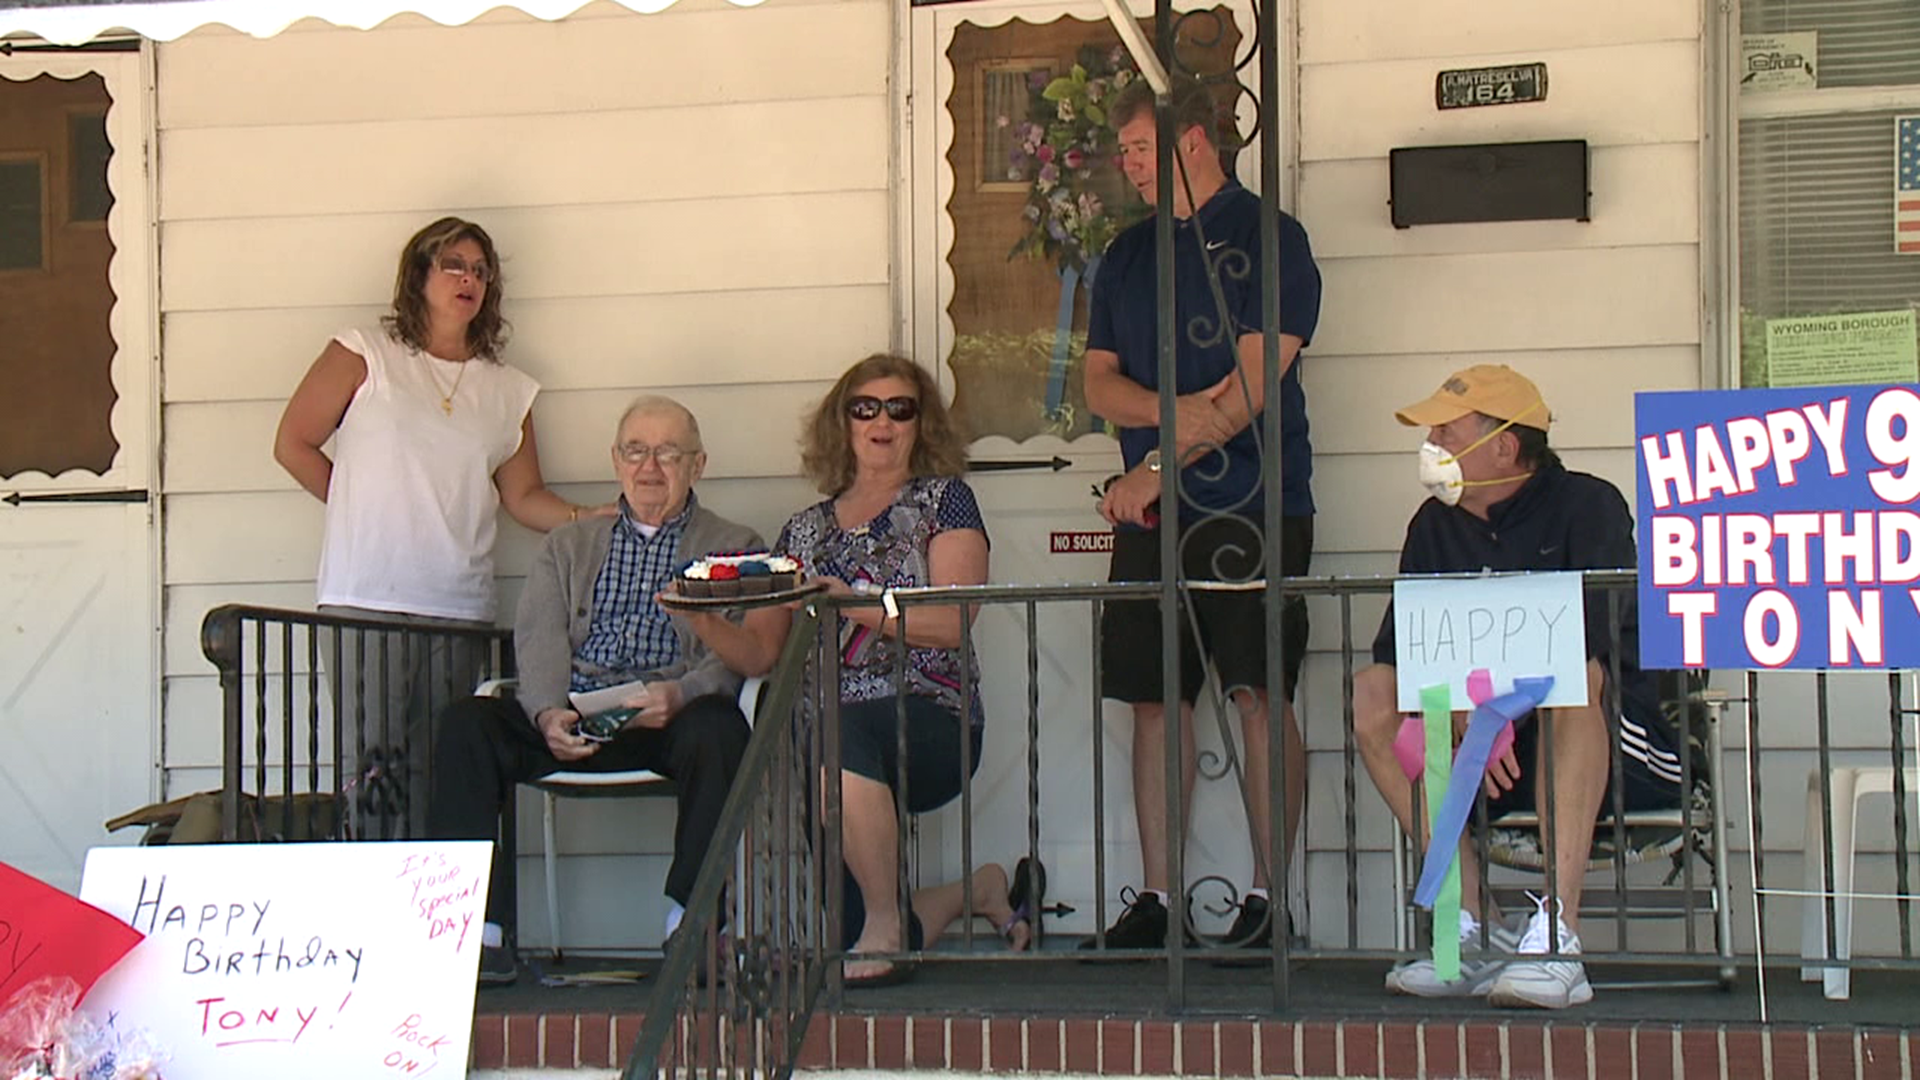 Family and friends came together in Luzerne County to celebrate the veteran's birthday.